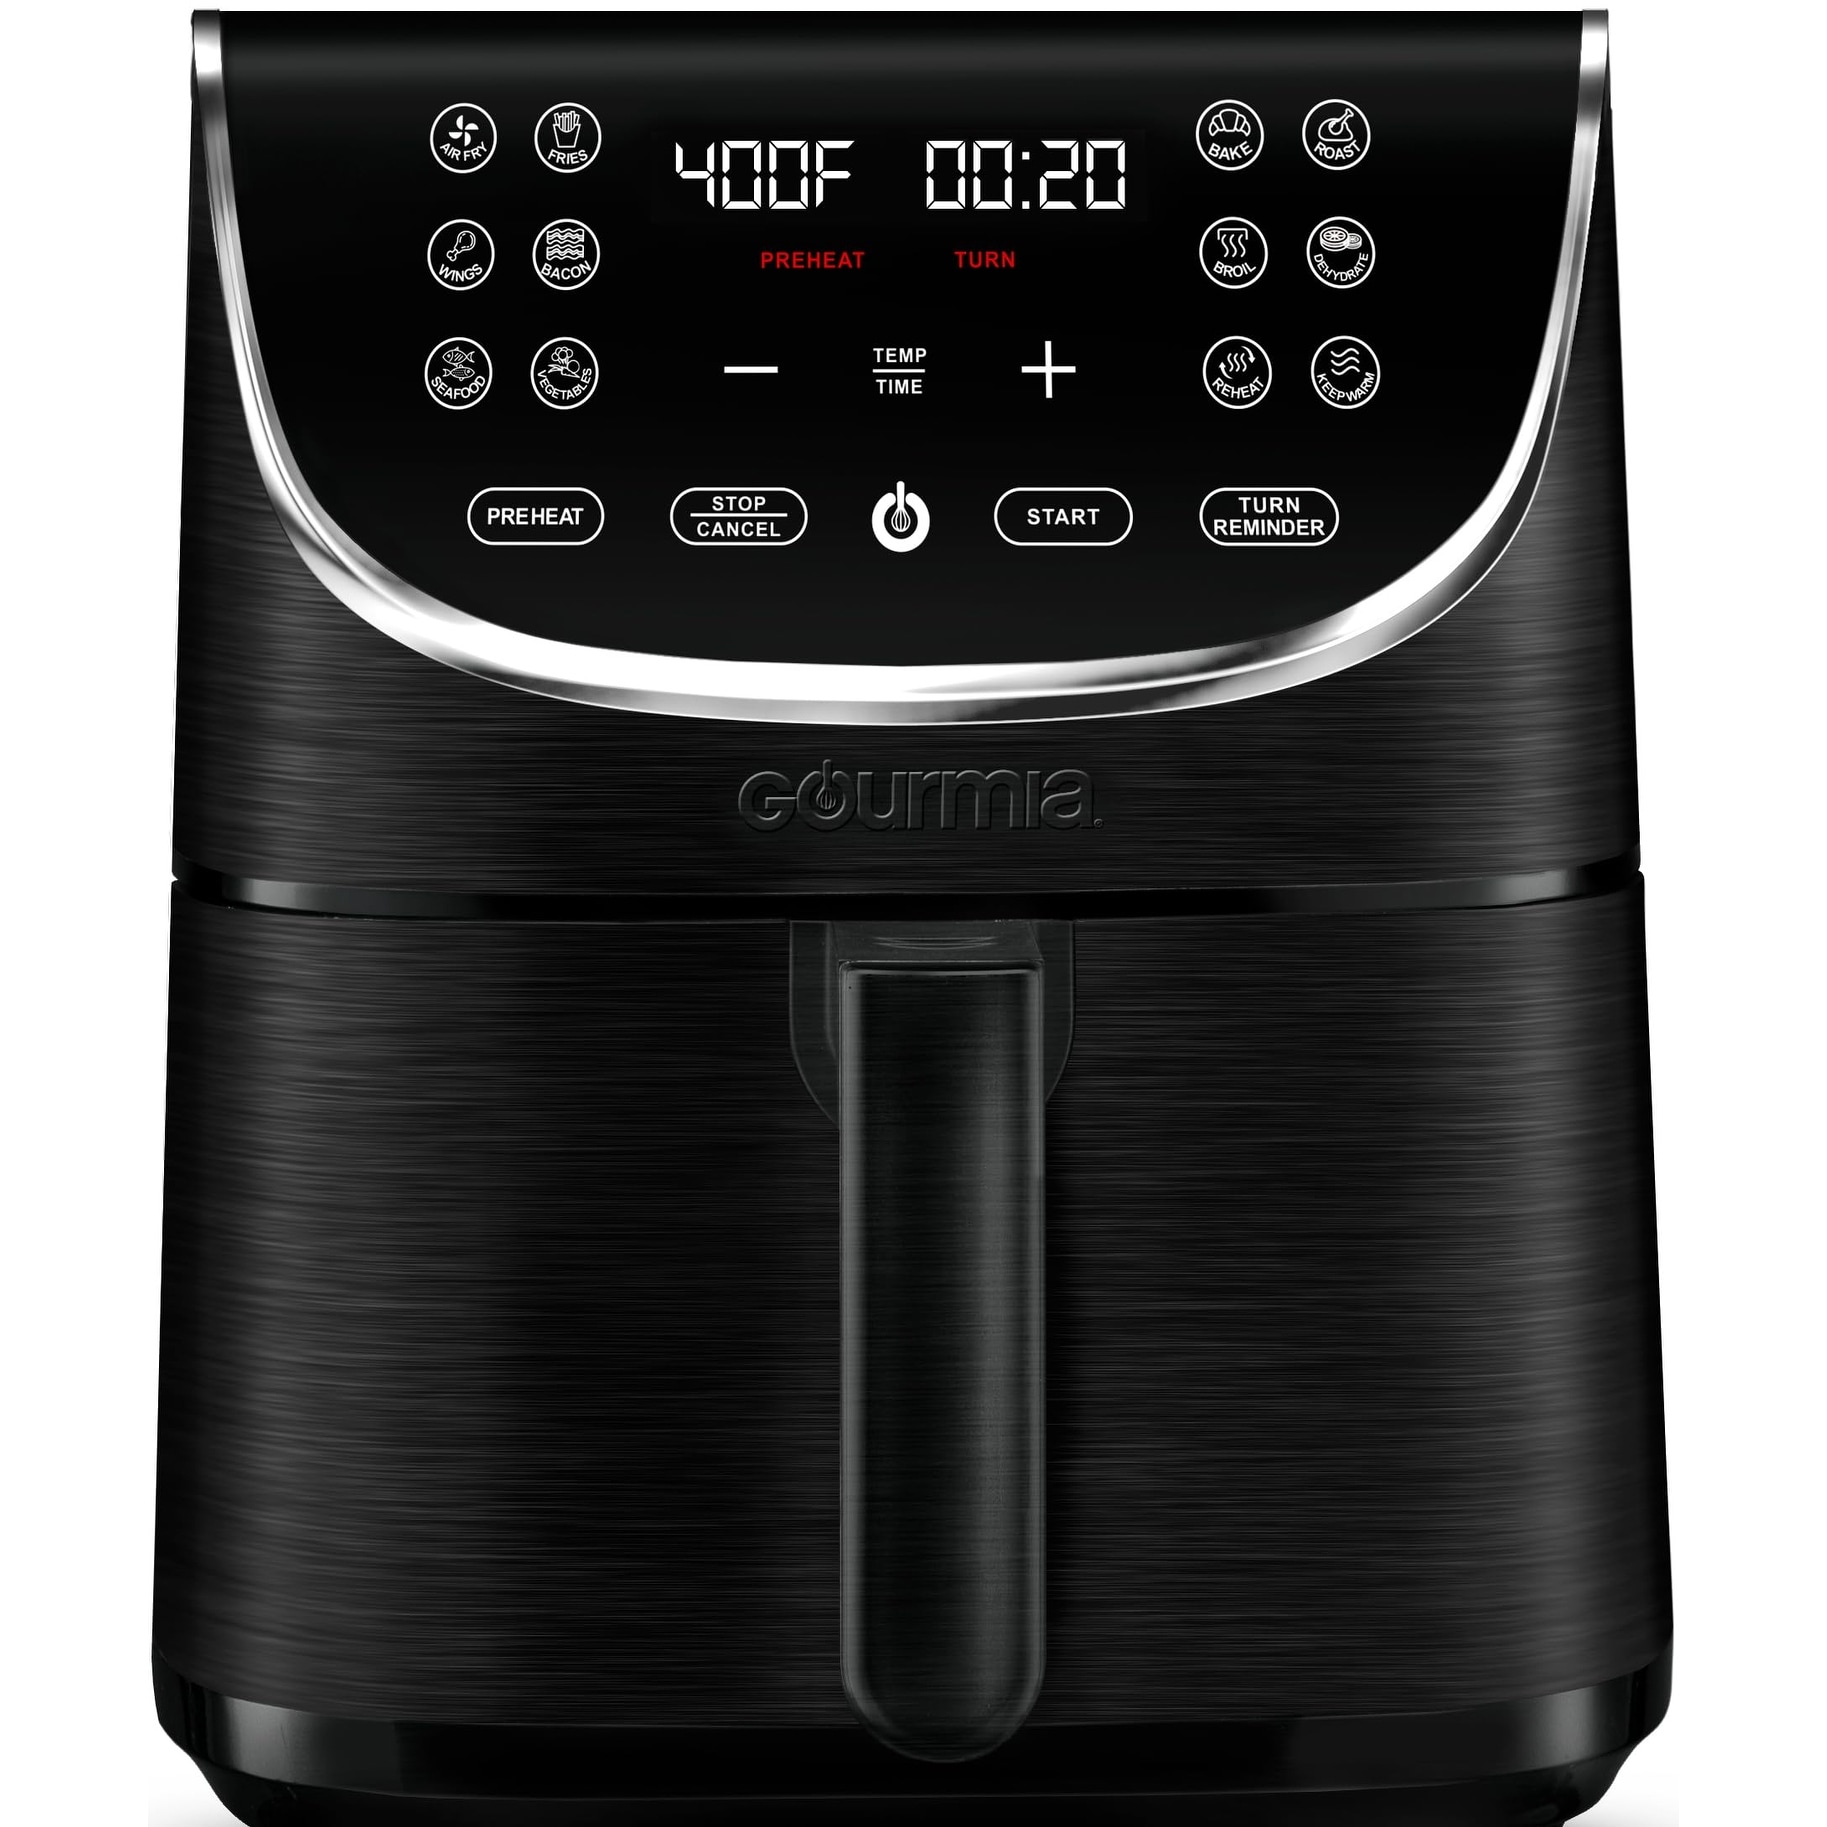 https://ak1.ostkcdn.com/images/products/is/images/direct/e1ae9a5bbf5b192b7e50ae51039c1d7b6b9ae504/Air-Fryer-Oven-Digital-Display-7-Quart-Large-AirFryer-Cooker-12-Touch-Cooking-Presets%2C-XL-Basket-1700w-Power-Multifunction.jpg